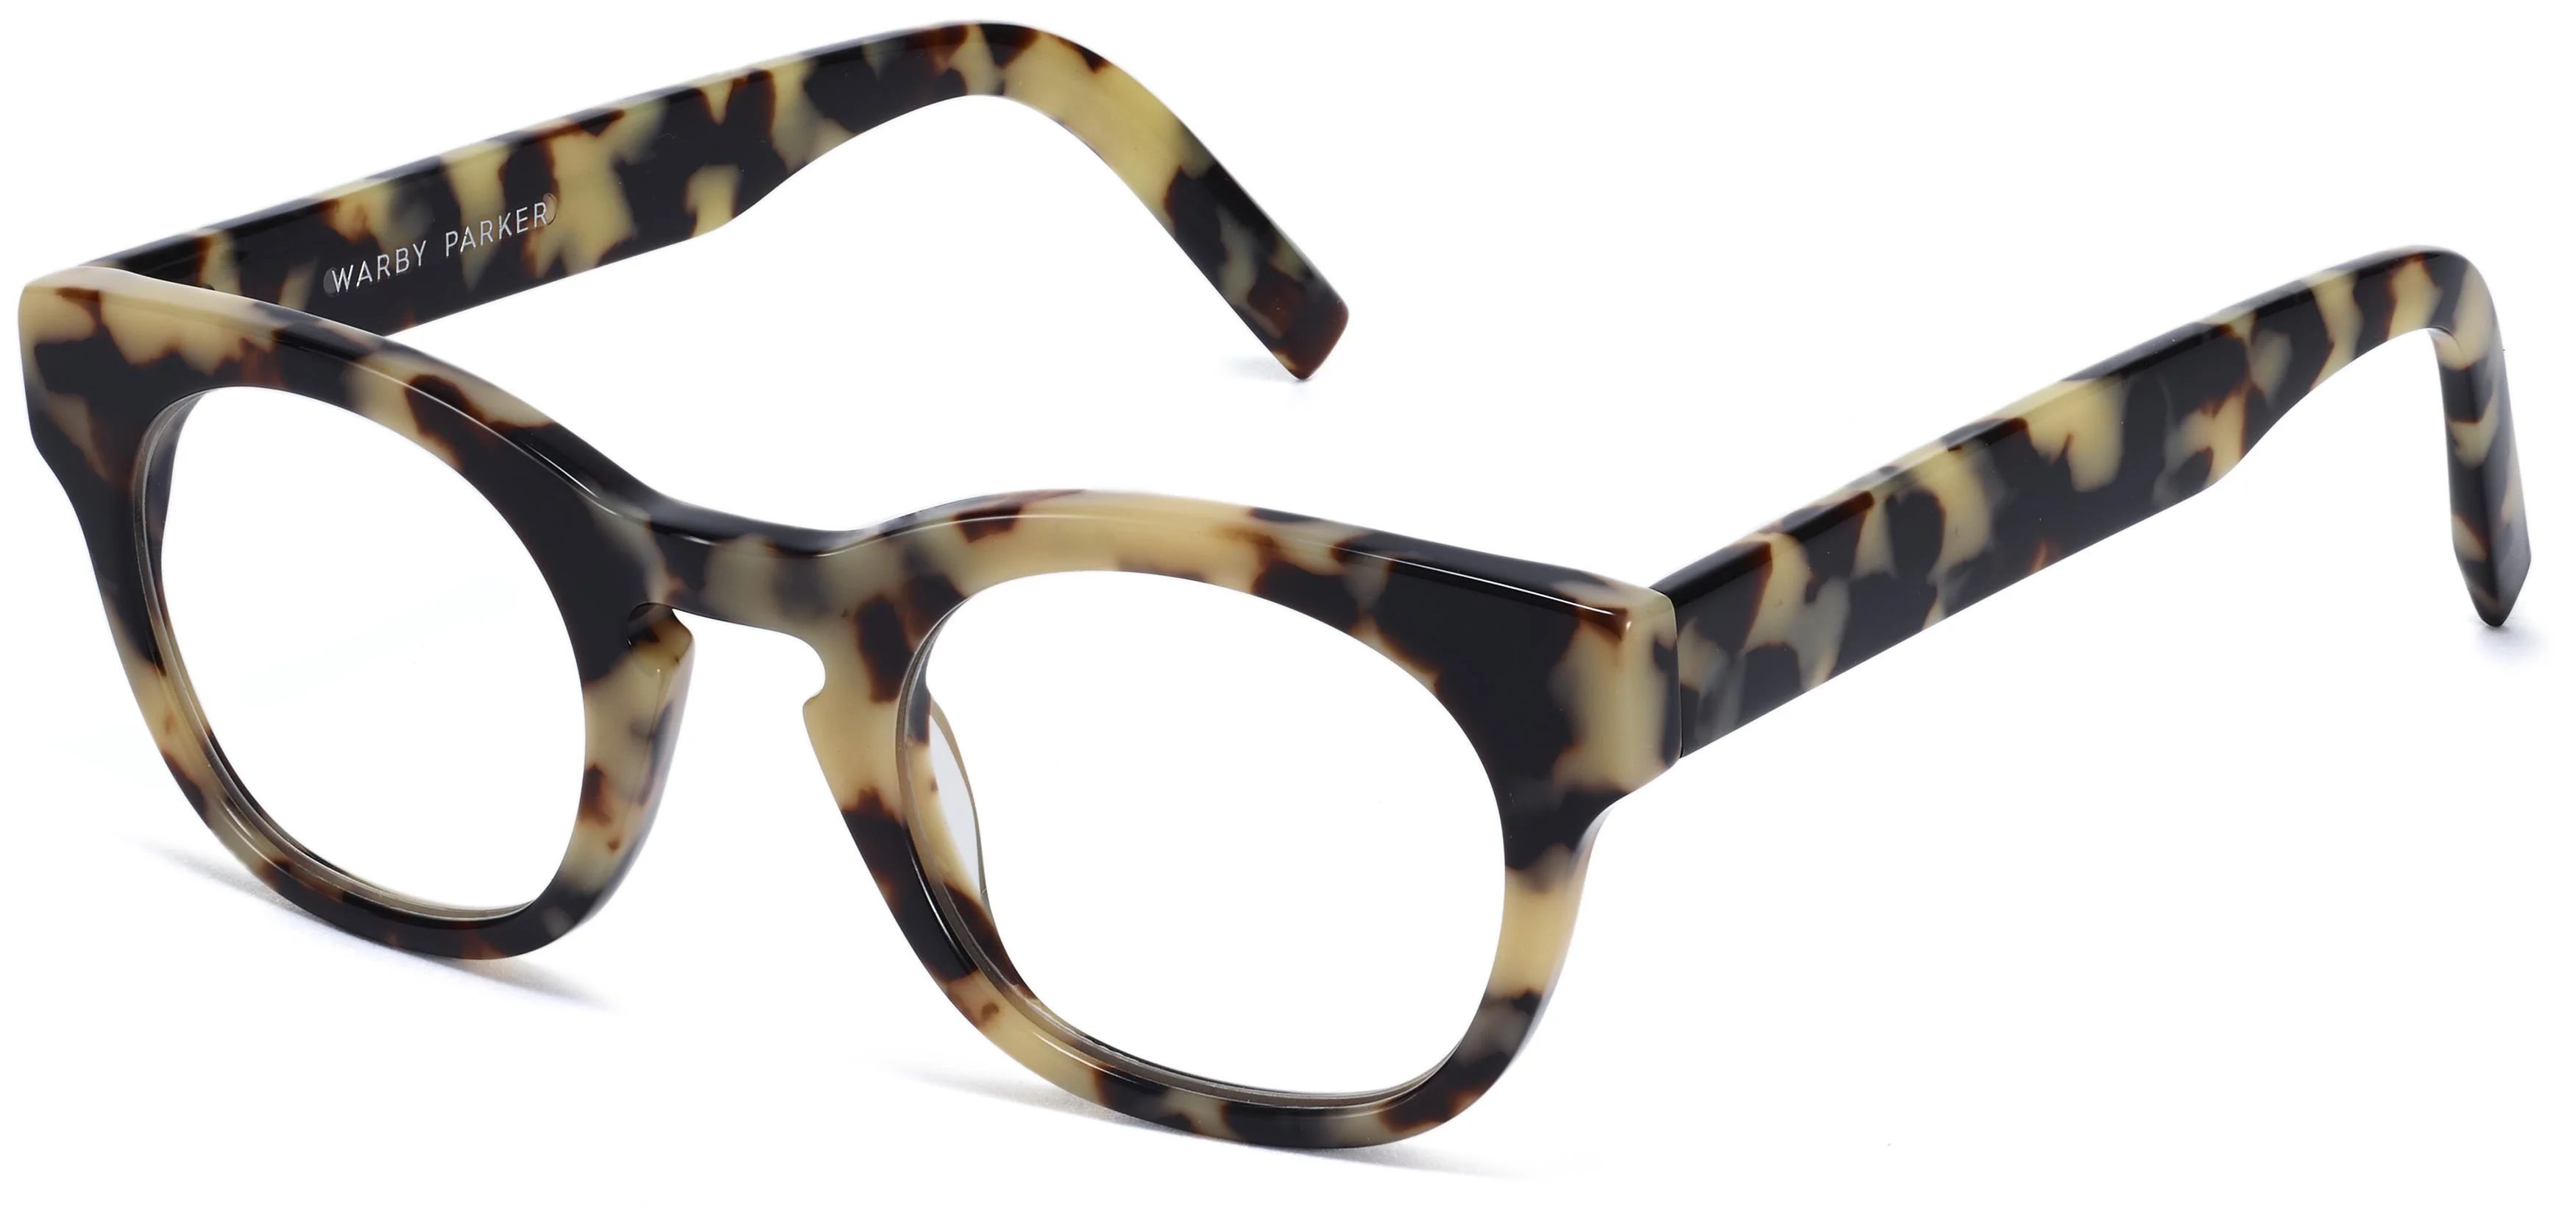 Kimball Eyeglasses in Marzipan Tortoise | Warby Parker | Warby Parker (US)